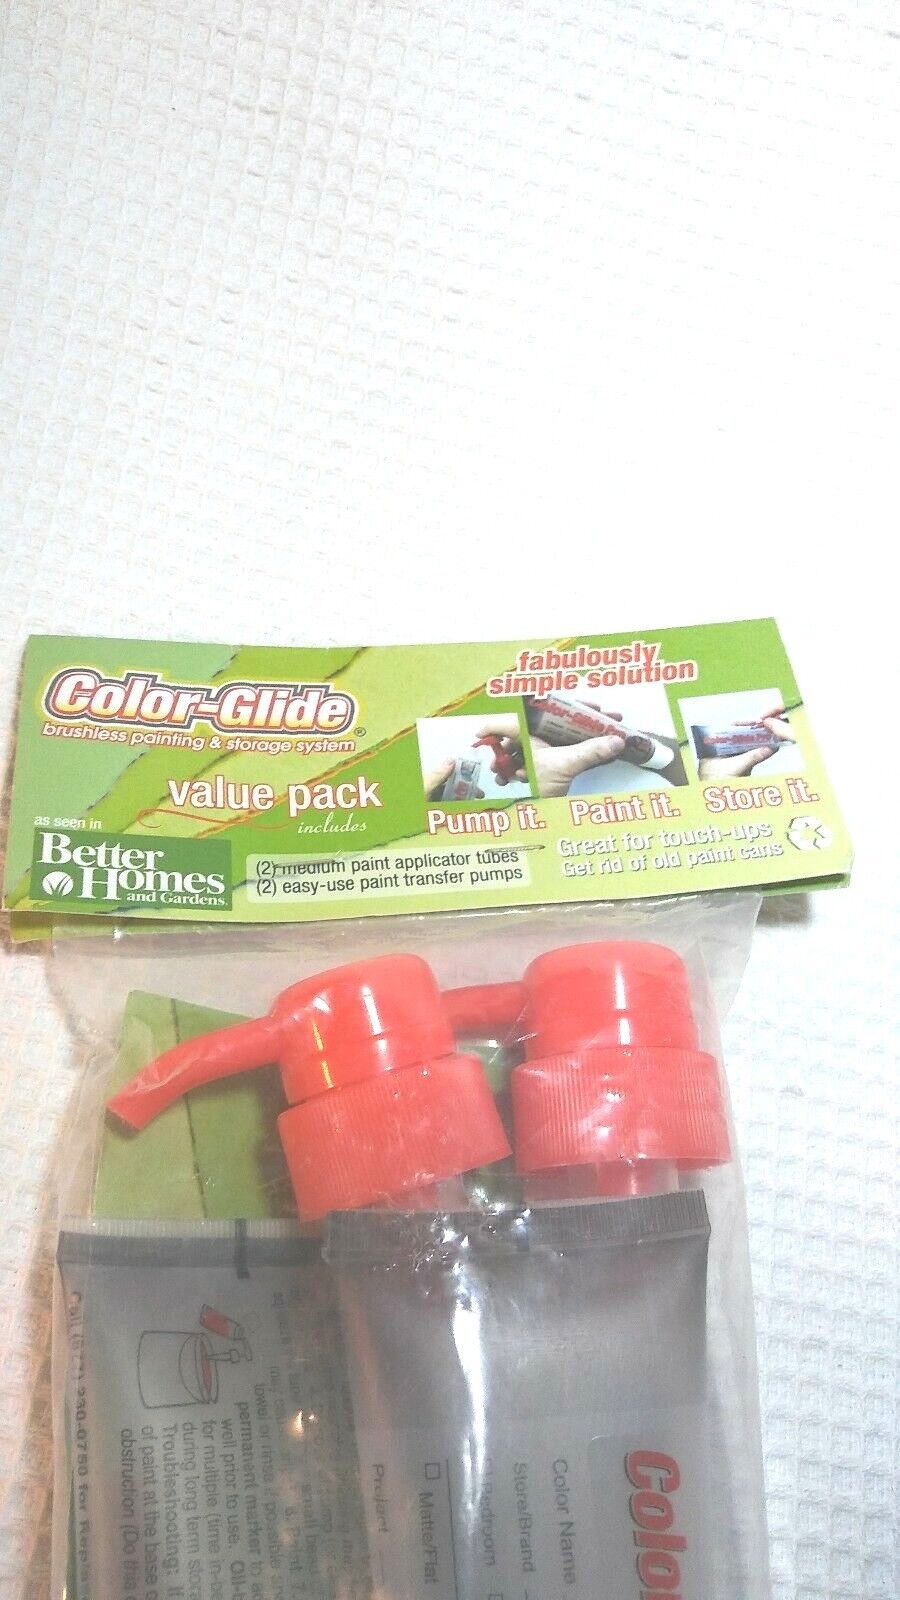 2 Packs! Better Homes Color Glide Brushless Painting And Storage Better Homes & Garden Does Not Apply